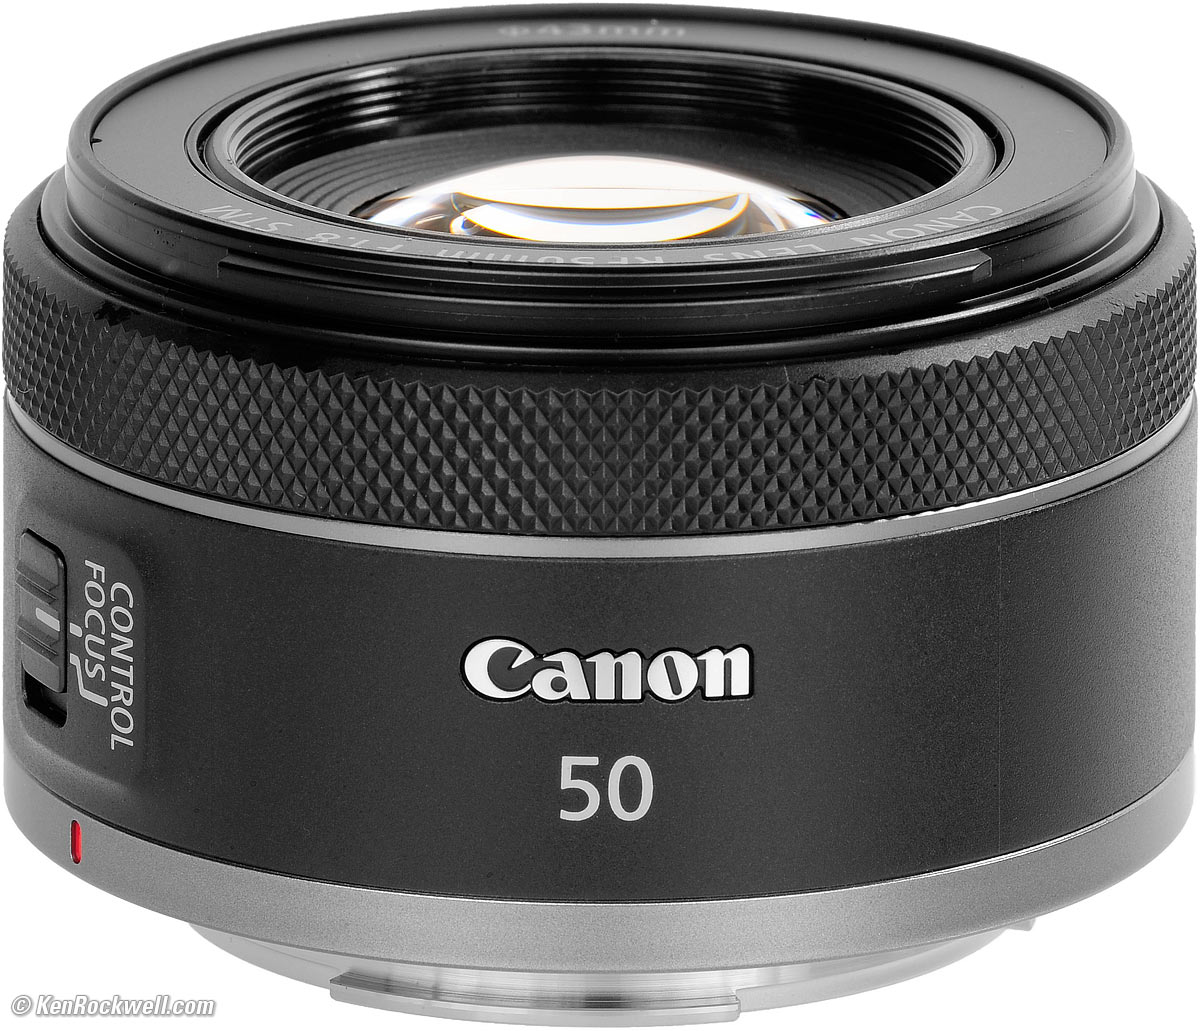 Canon Rf50mm Stm F18